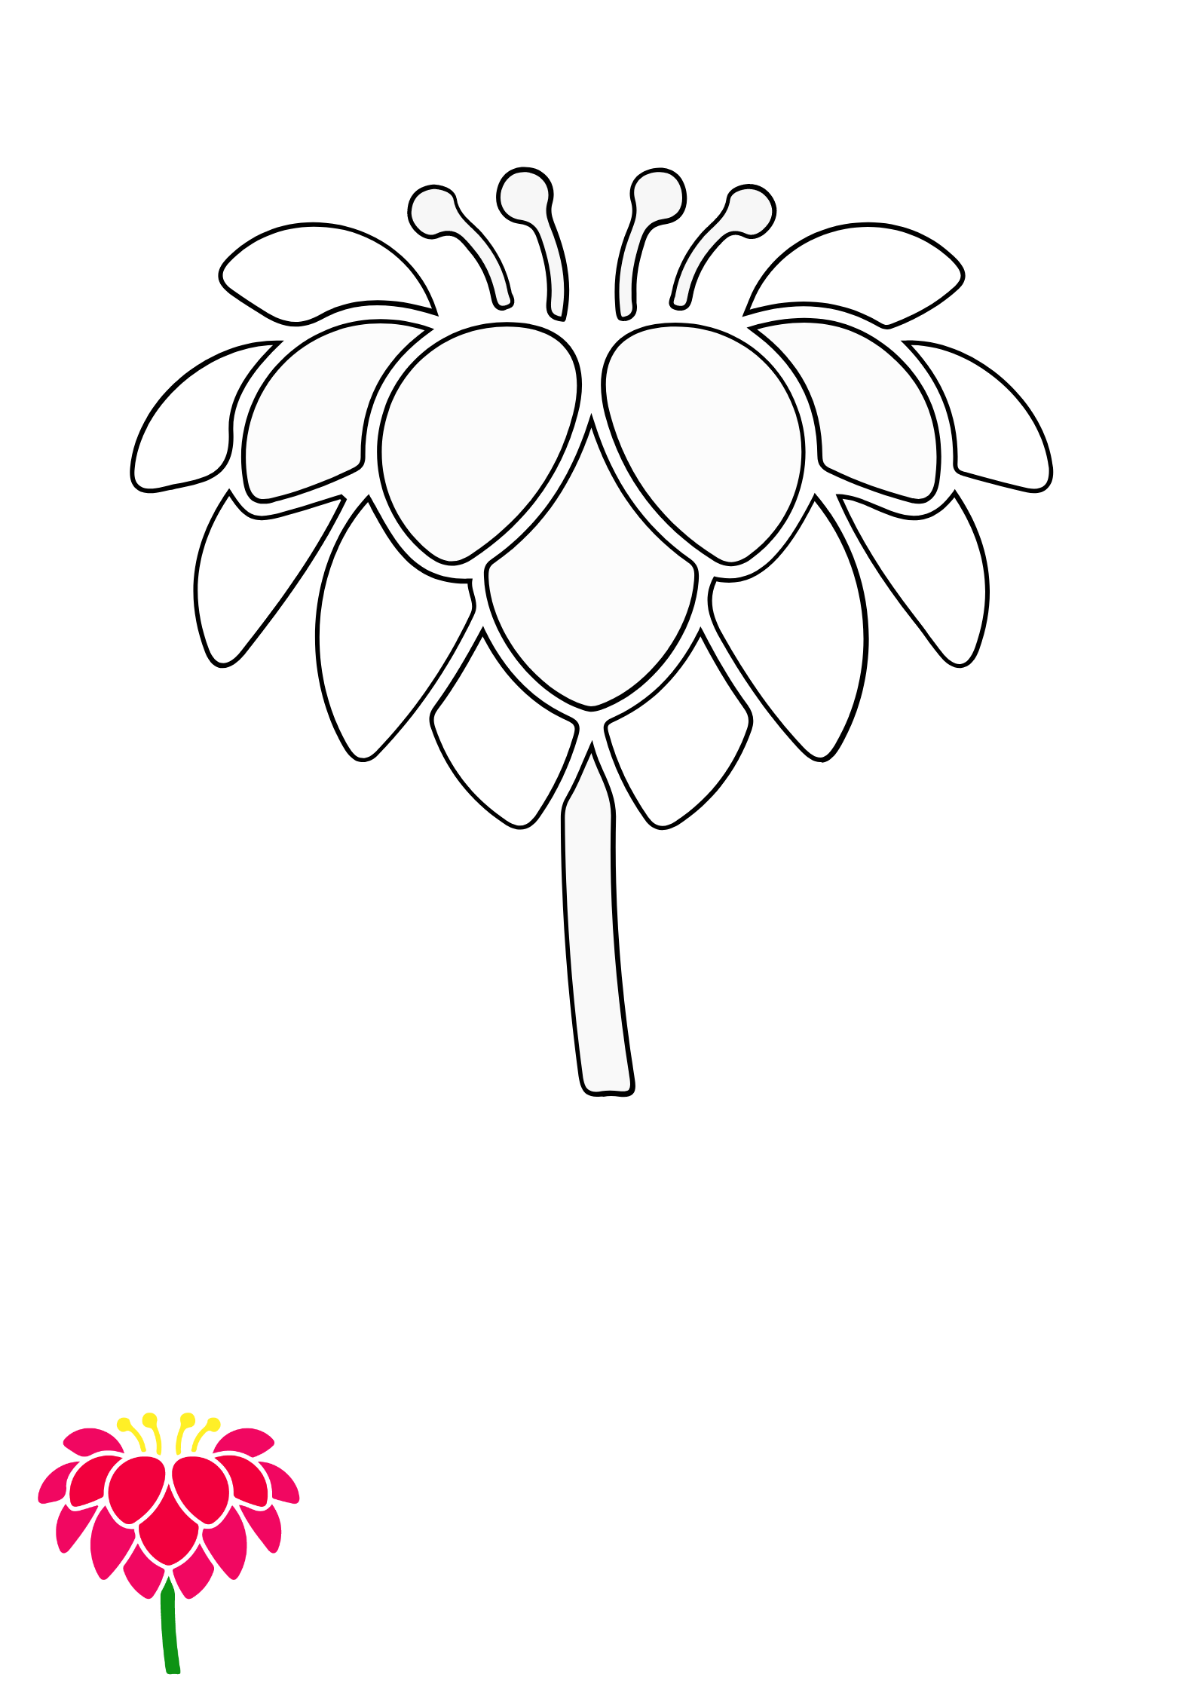 Dahlia Flower Coloring Page Template